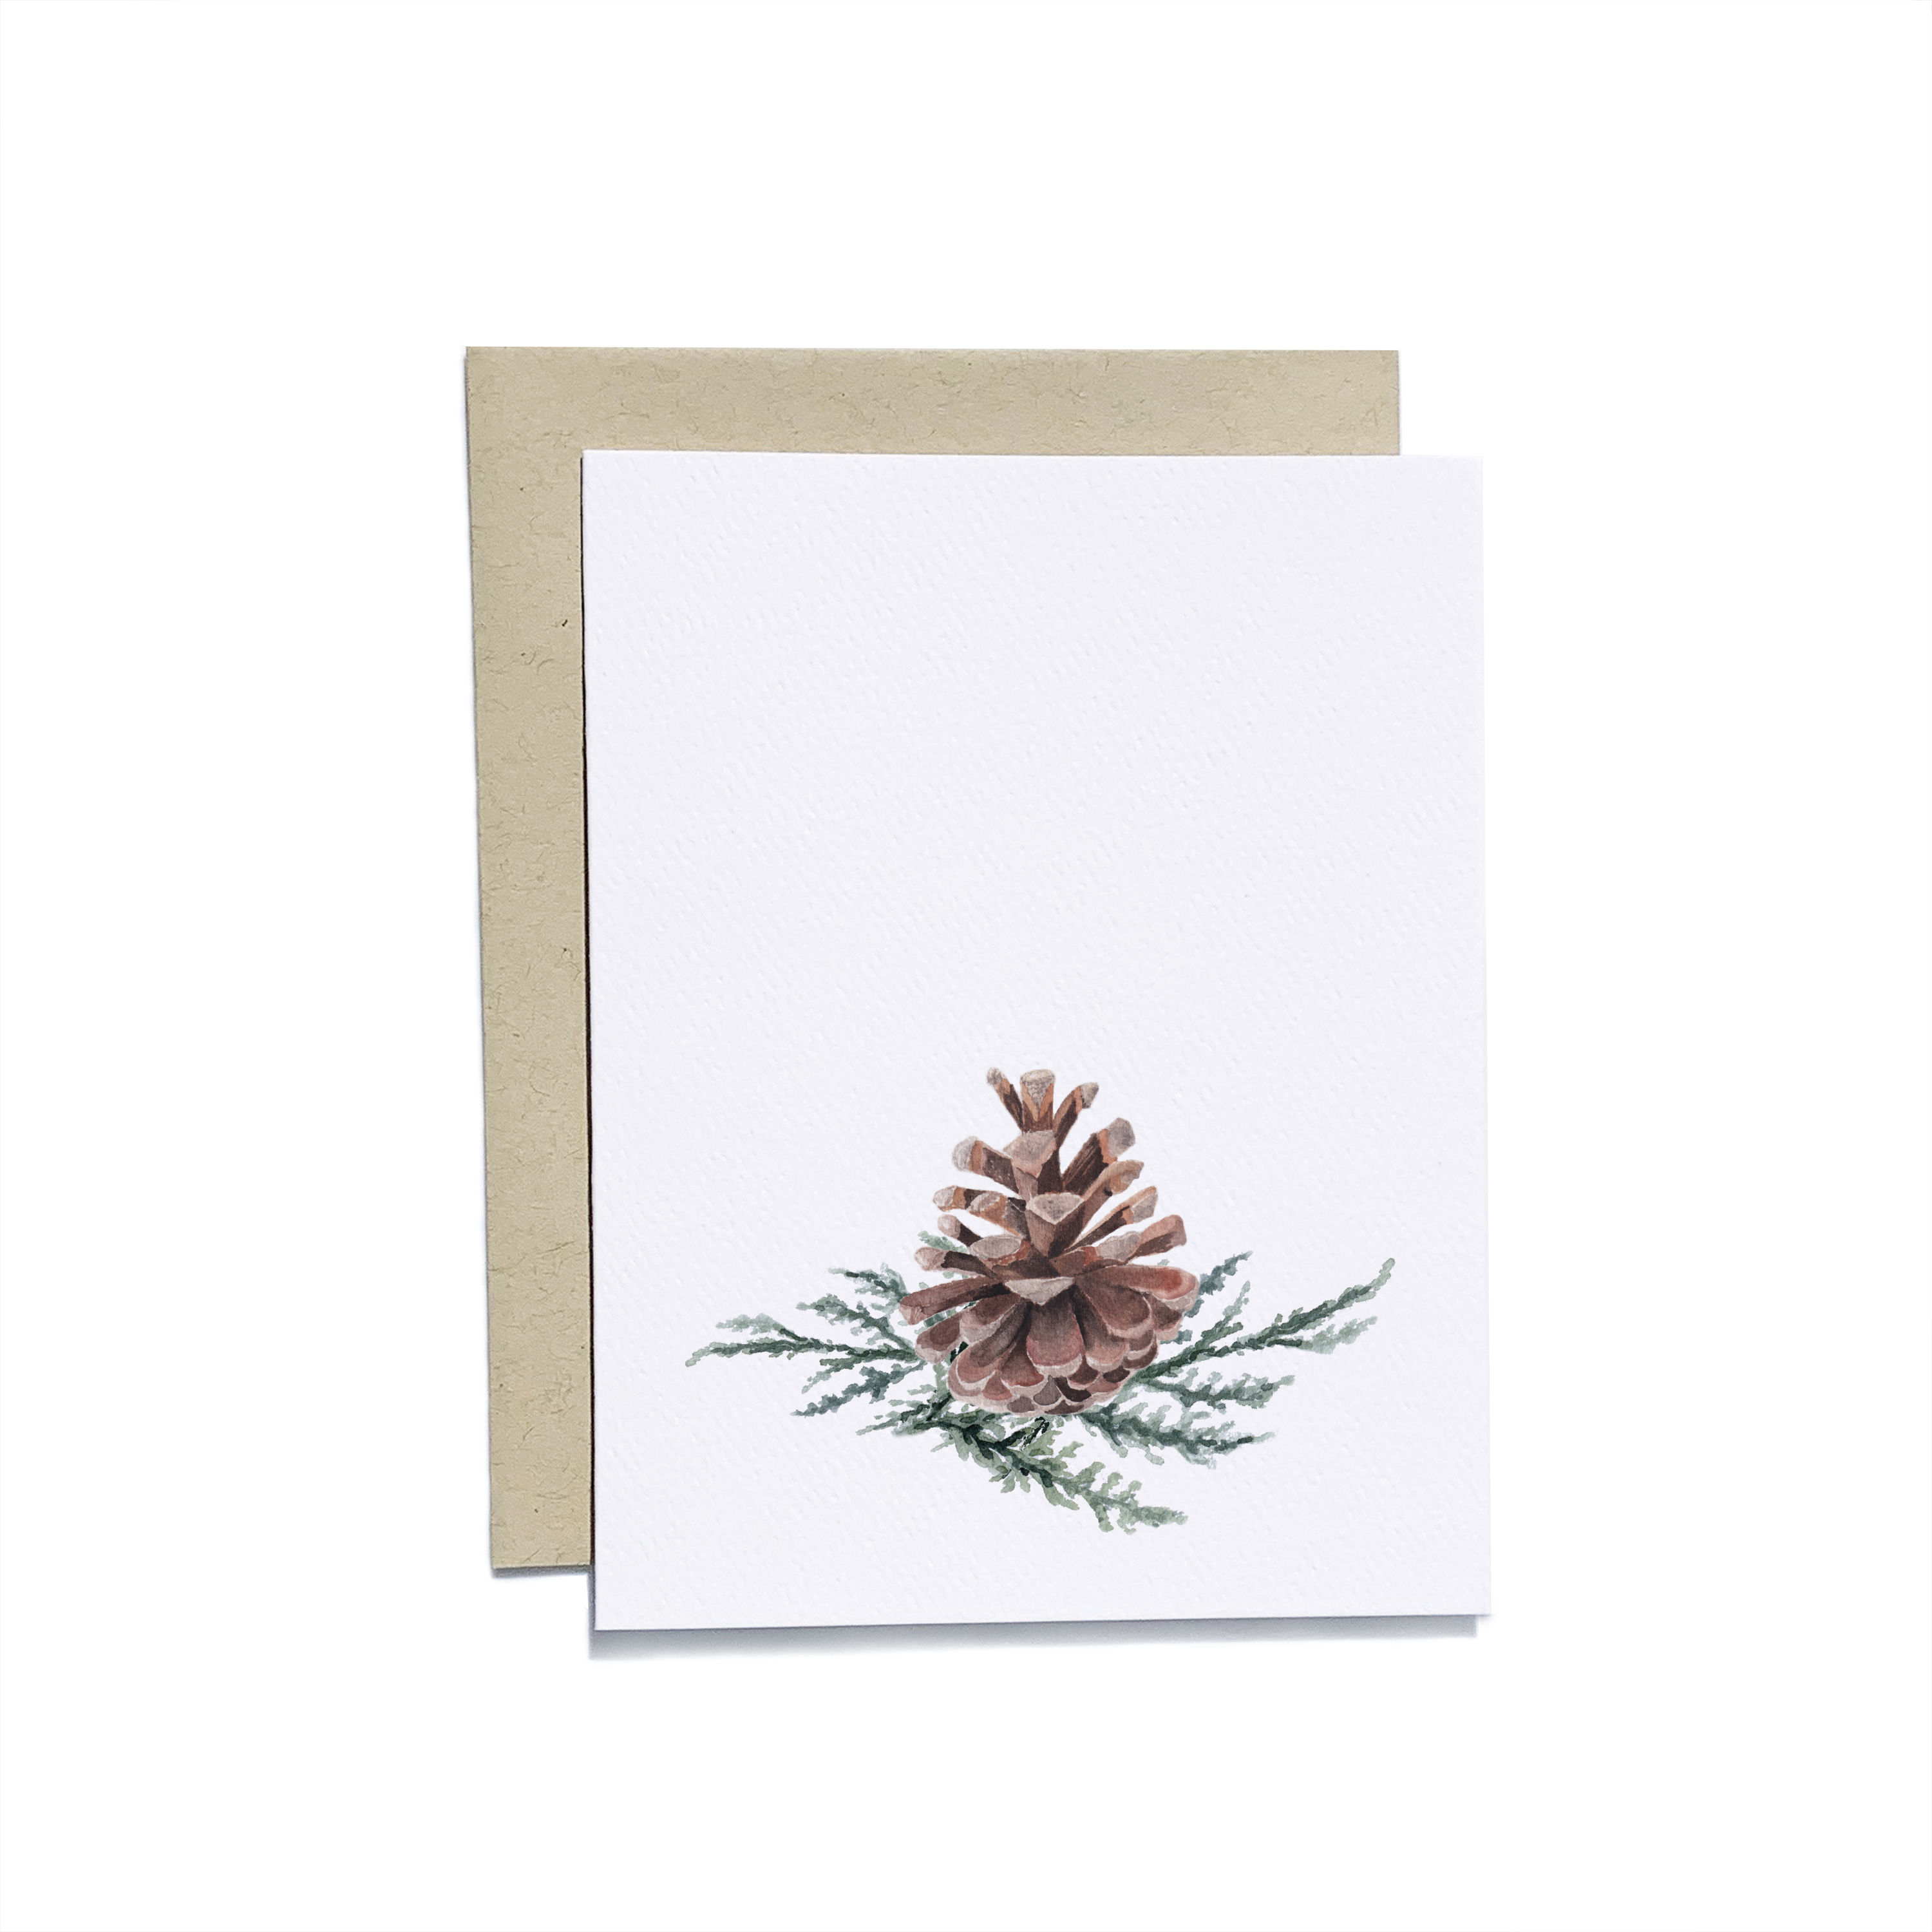 https://kyliepaper.co/wp-content/uploads/2021/09/GC-HOL-004_pinecone-w-greenery-1.png